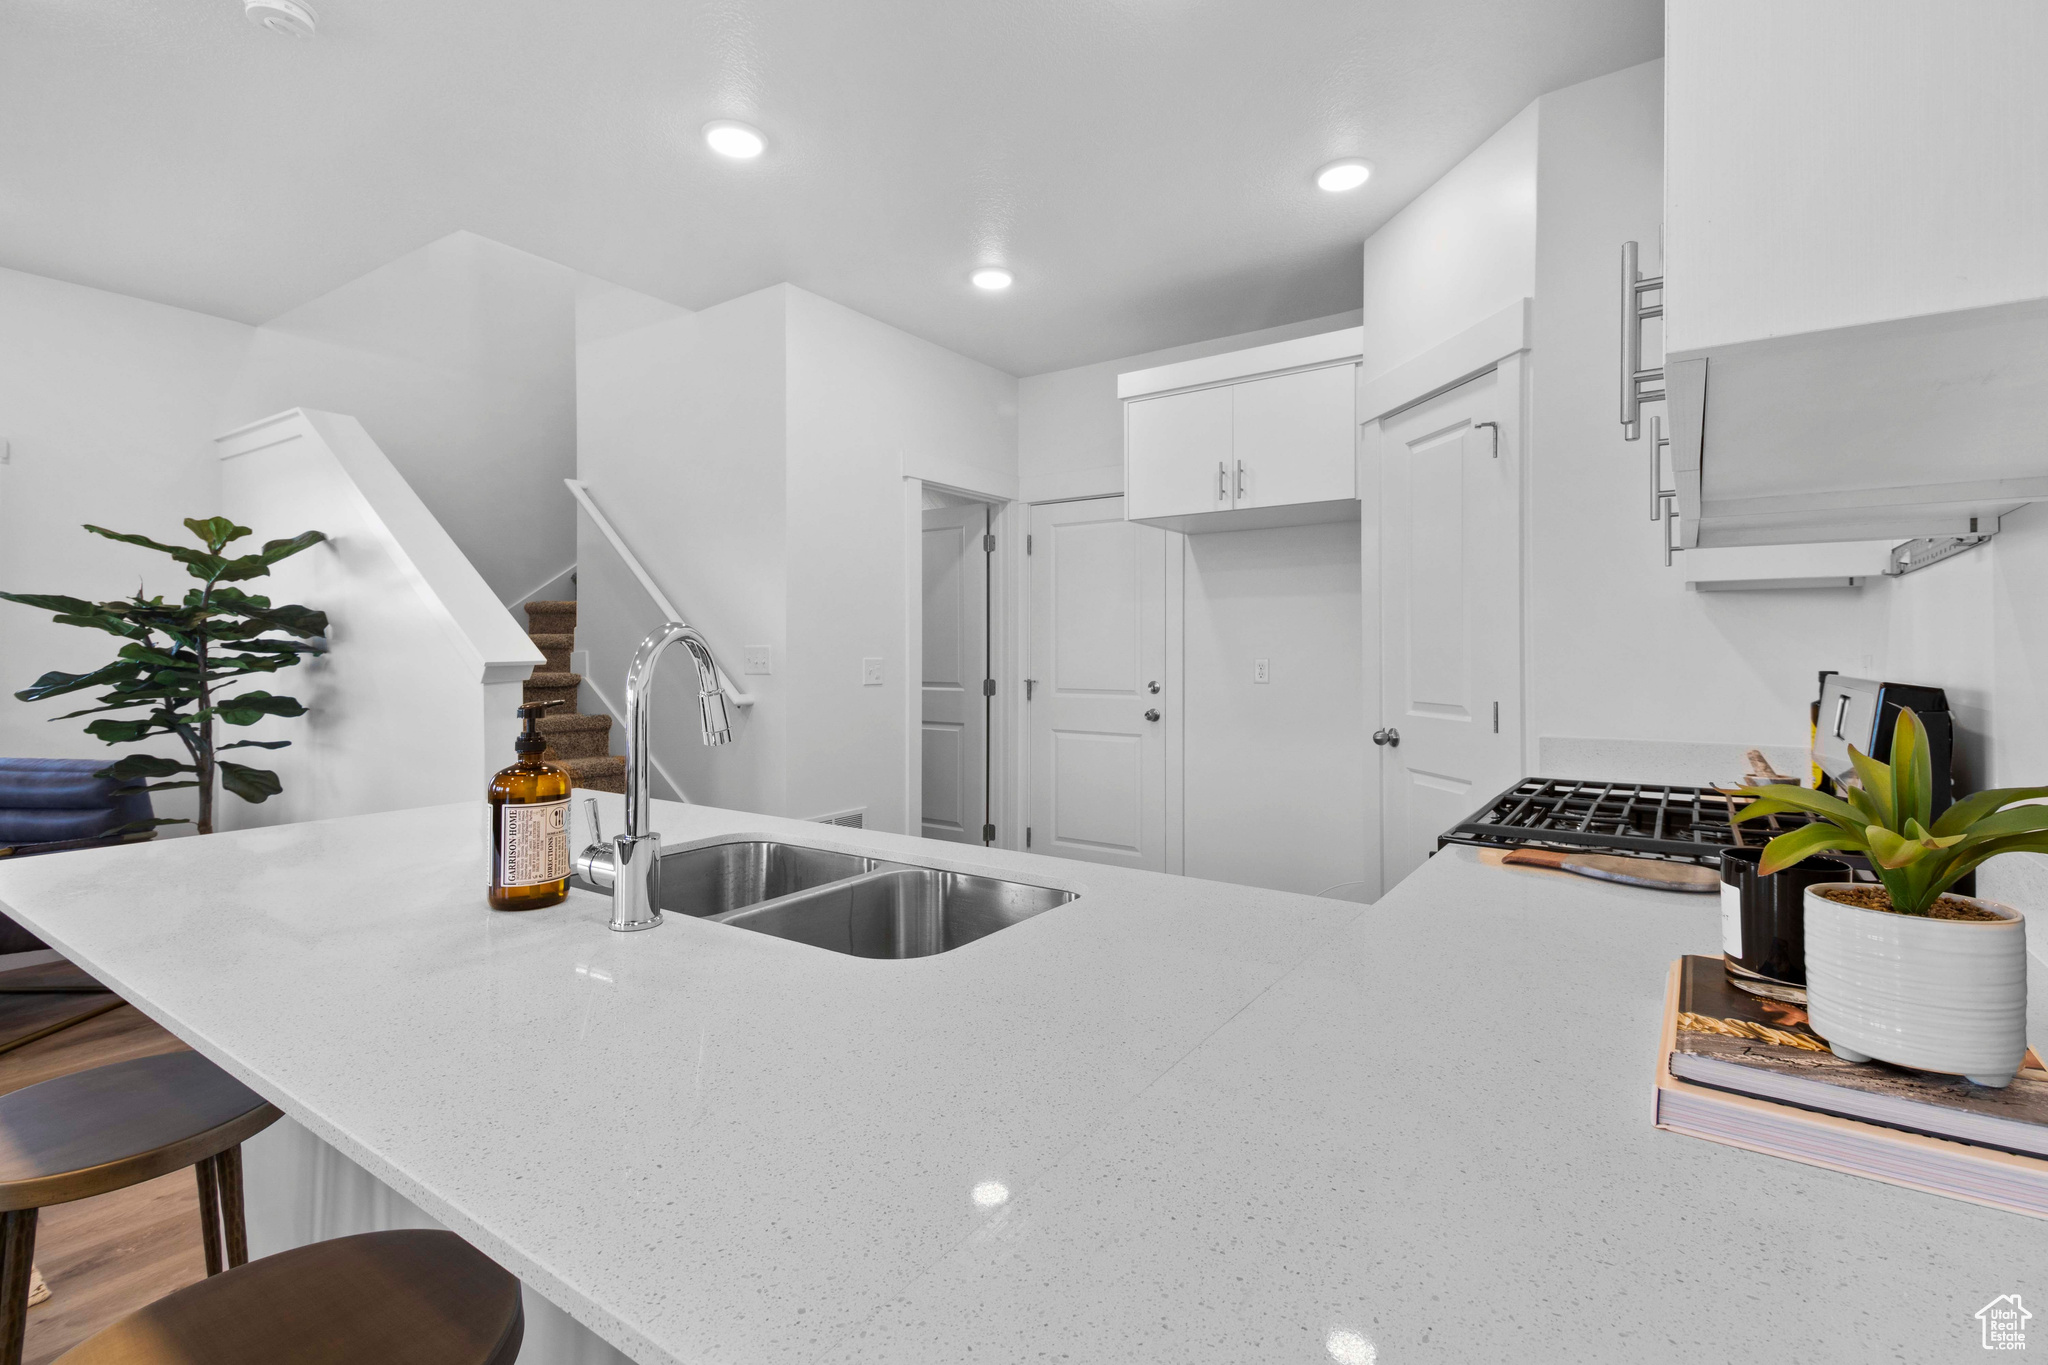 Kitchen with a breakfast bar, sink, white cabinetry, kitchen peninsula, and light stone countertops